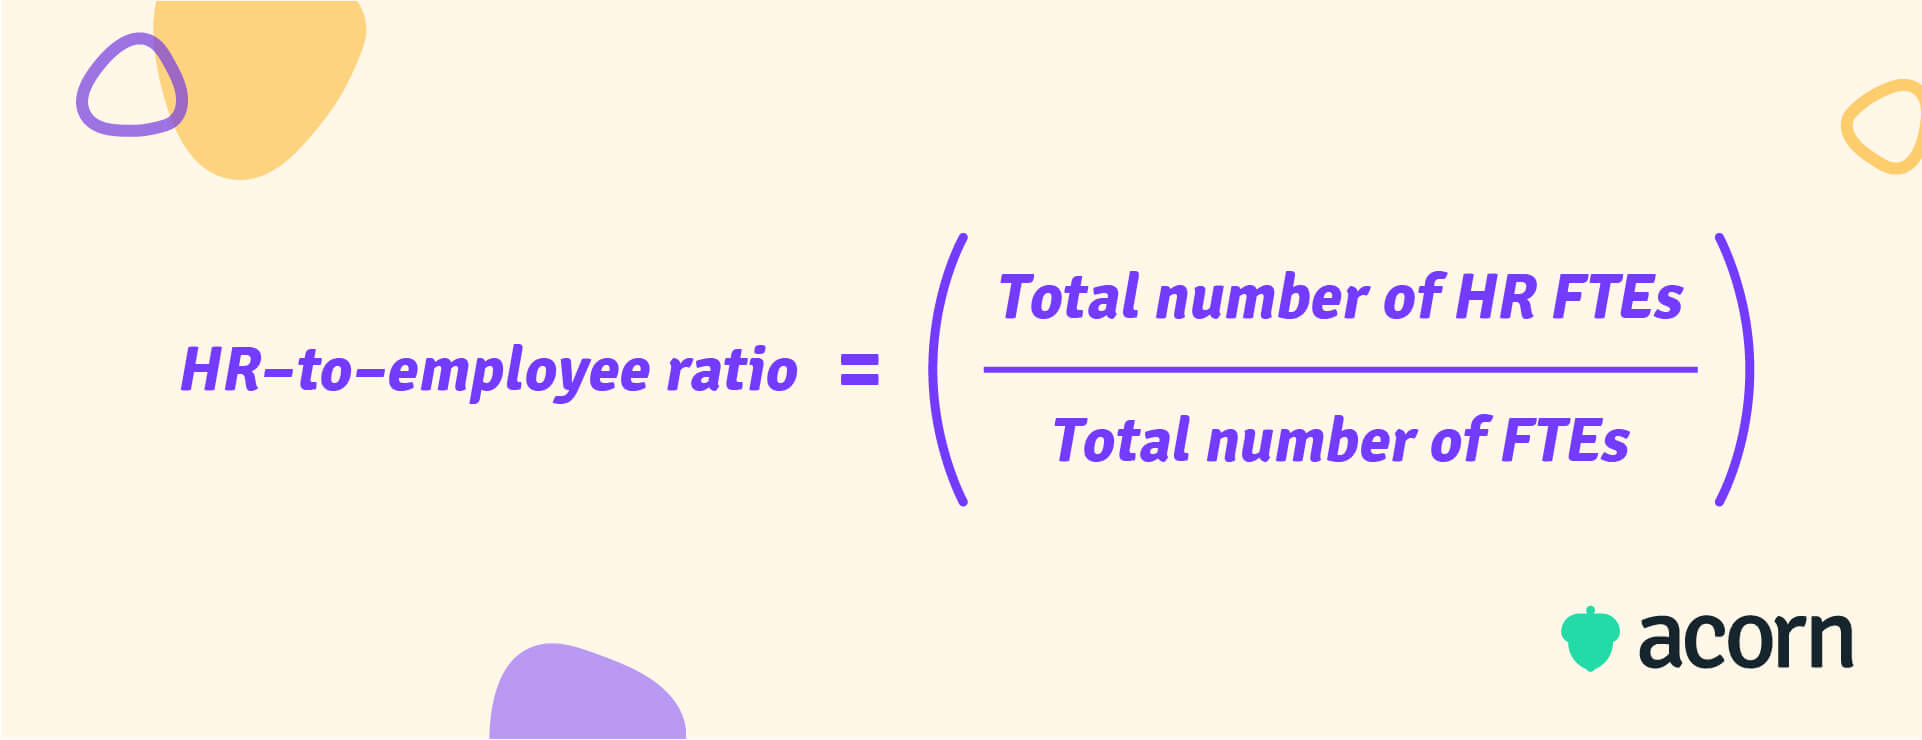 HR-to-employee ratio = (Total number of HR FTEs / Total numbero f FTEs)